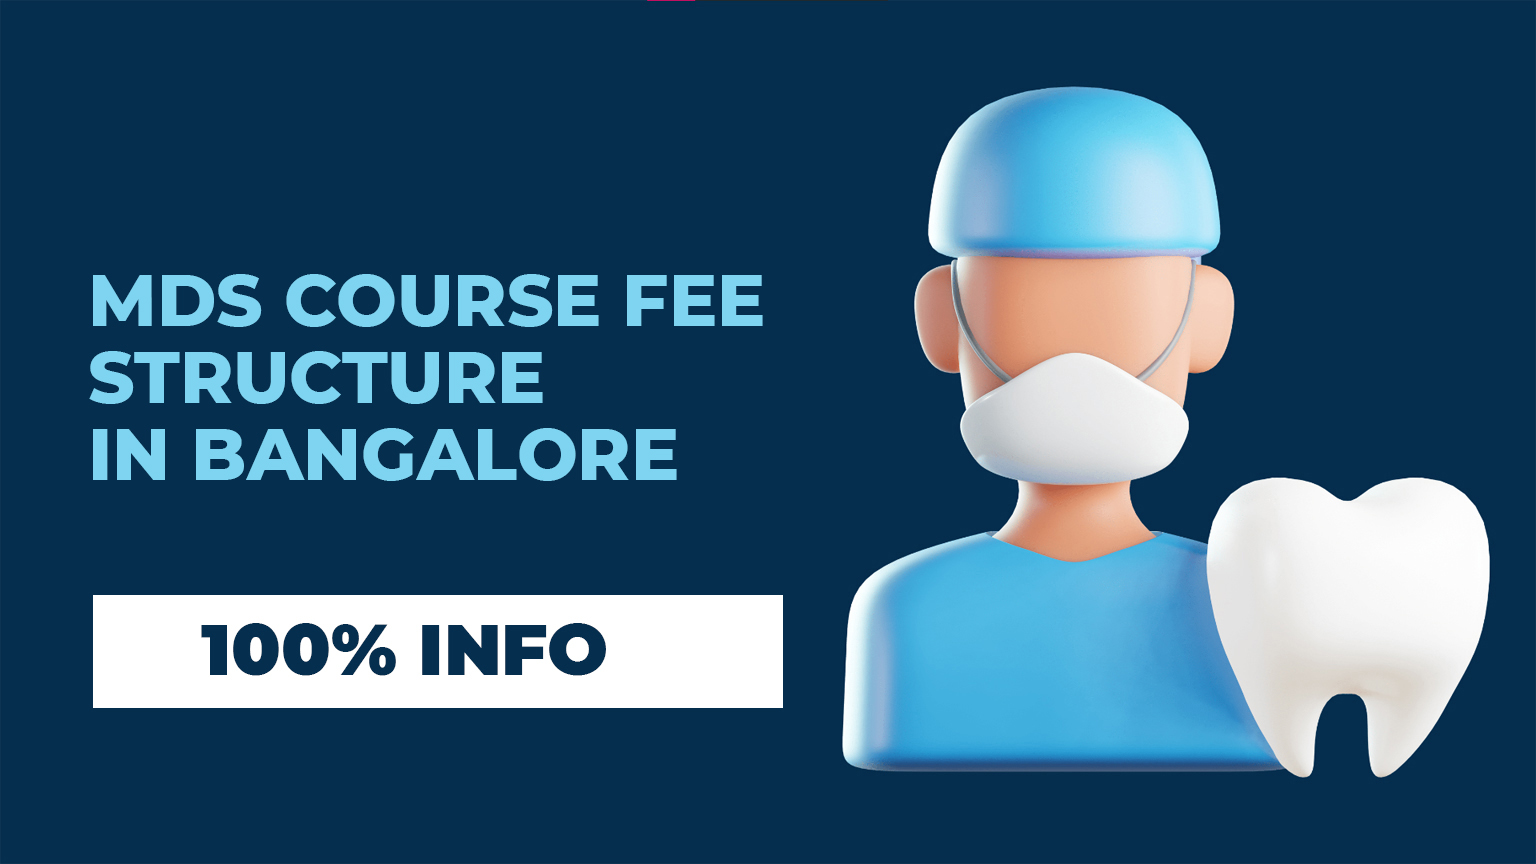 MDS course fees in Bangalore colleges